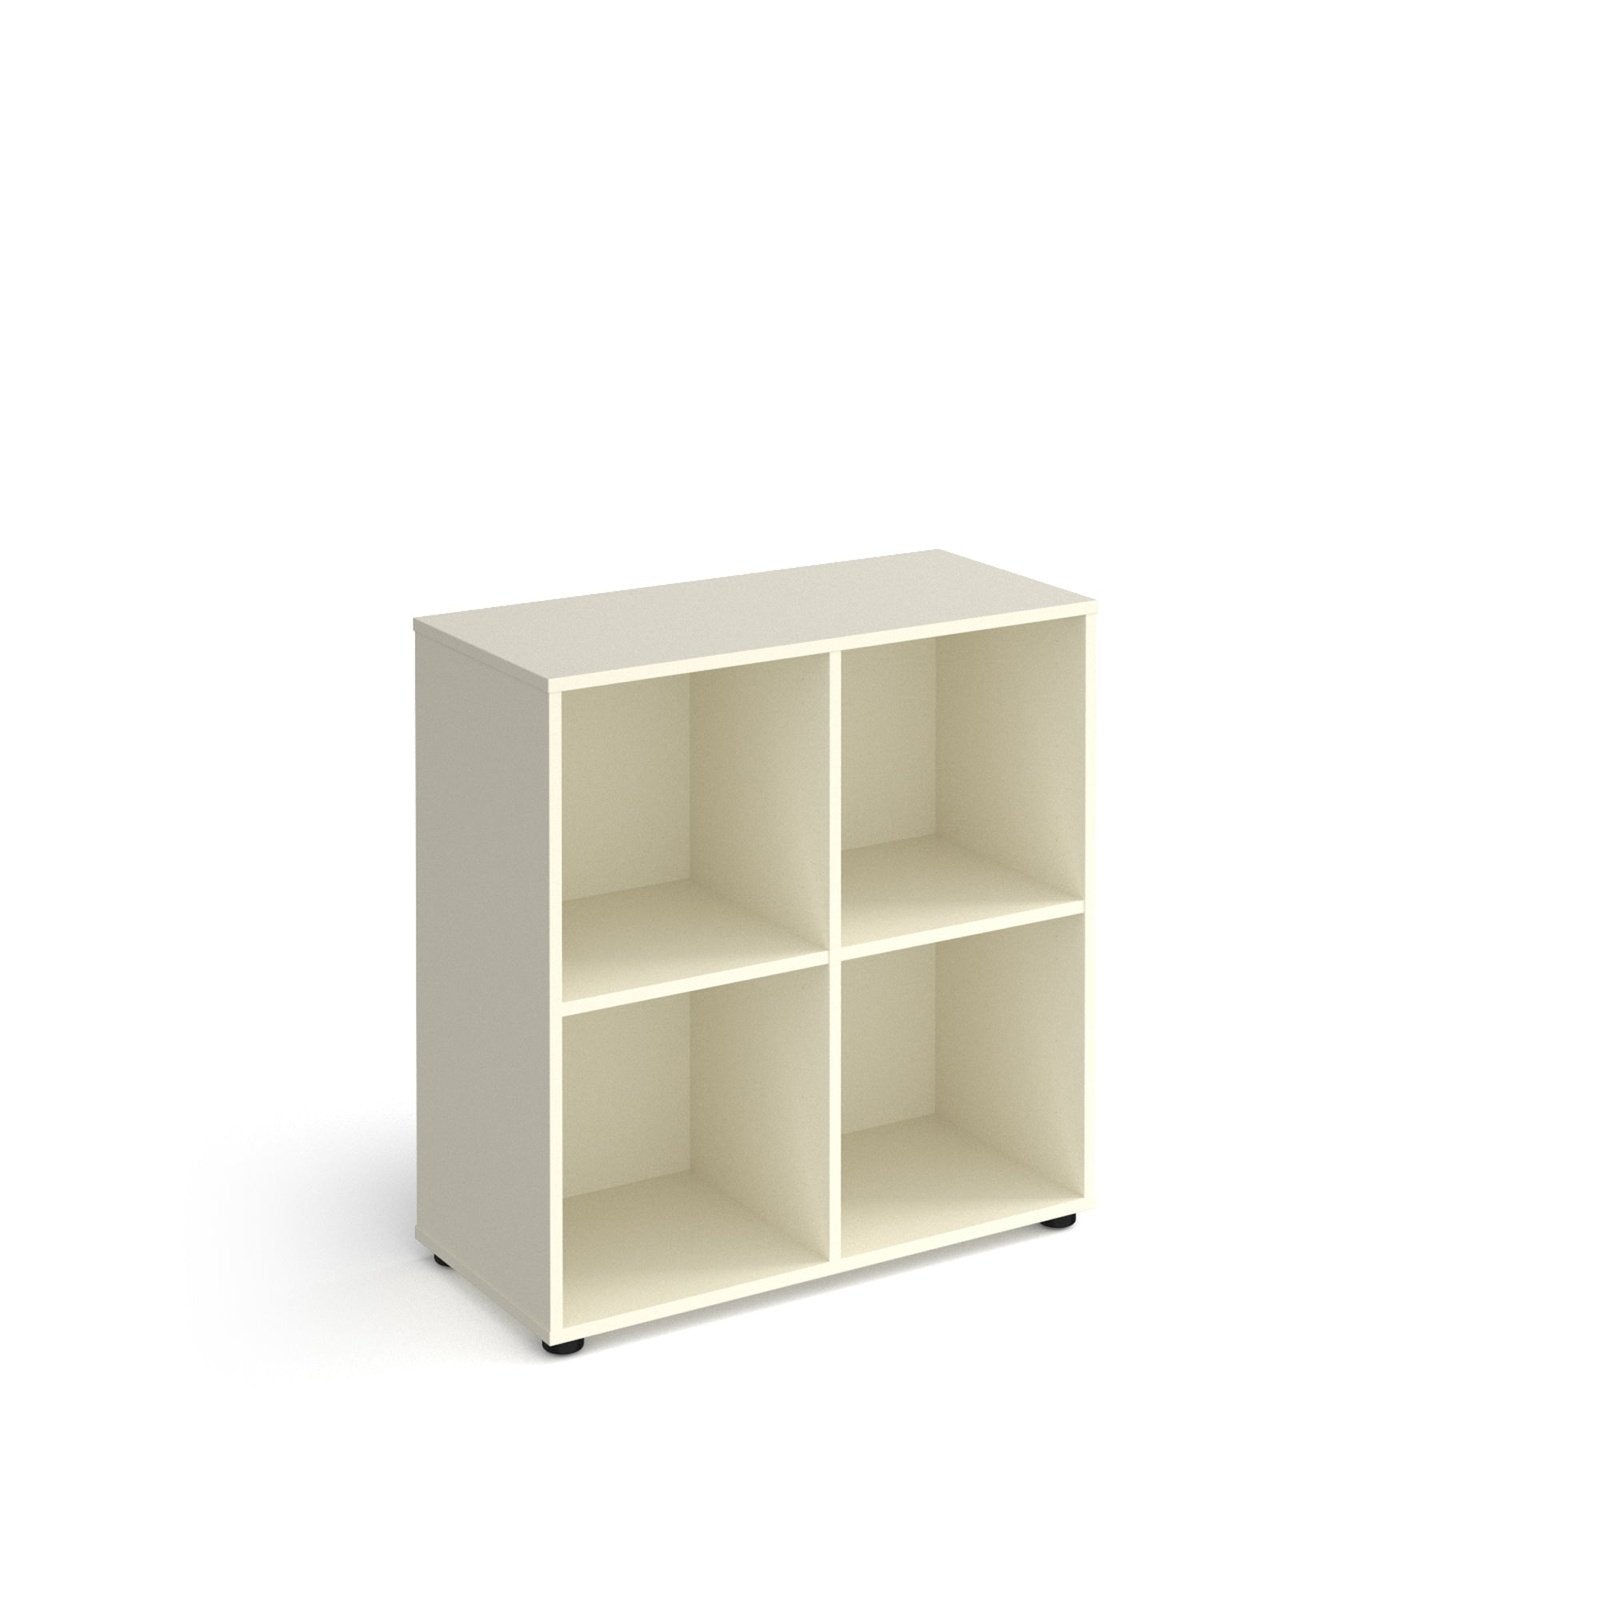 Universal cube storage unit - Office Products Online